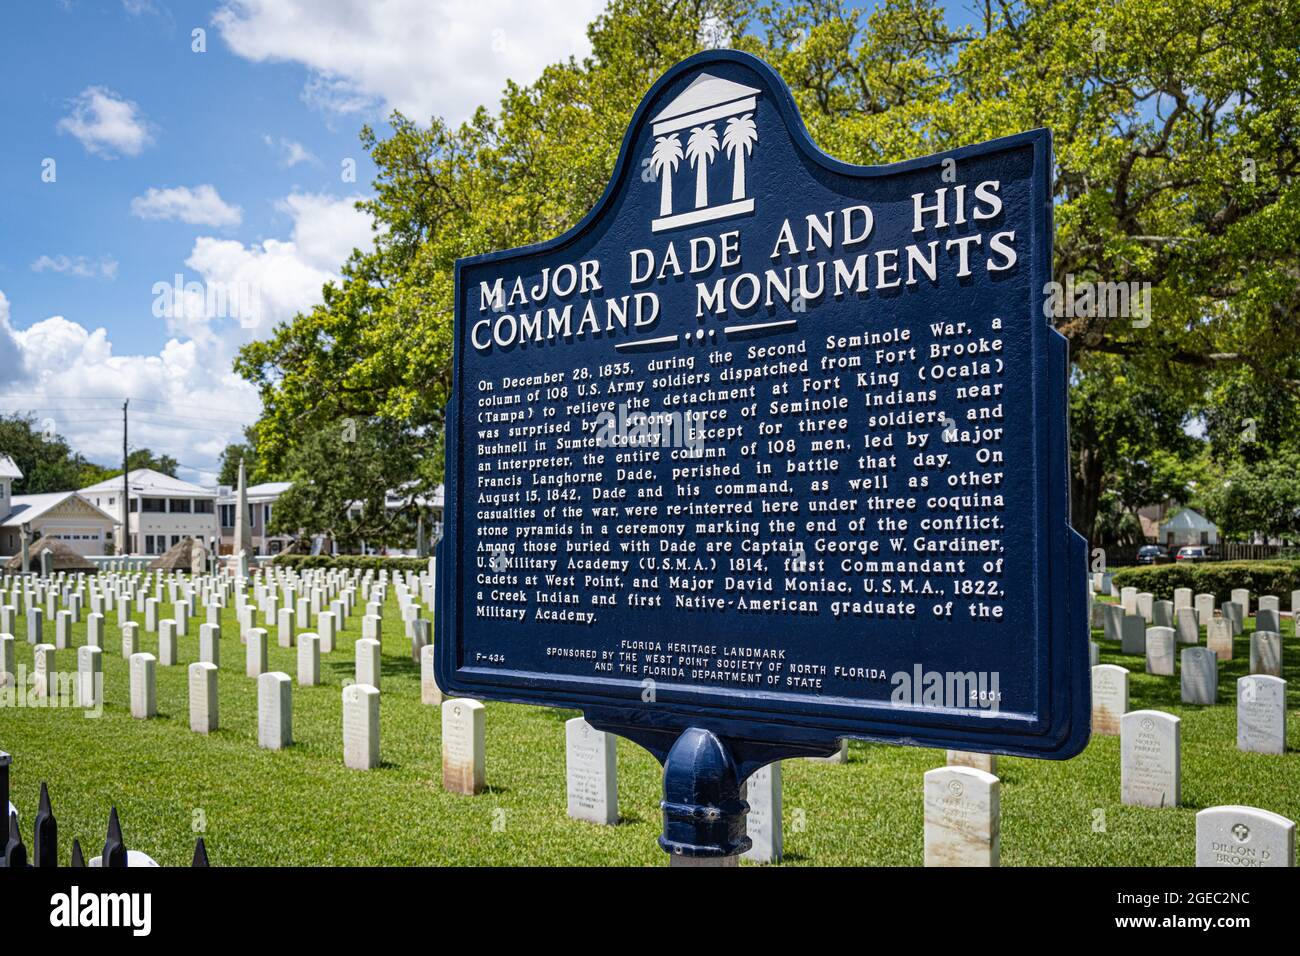 Historical marker for Major Dade and his Command Monuments at the St. Augustine National Cemetery, in St. Augustine, Florida. (USA) Stock Photo